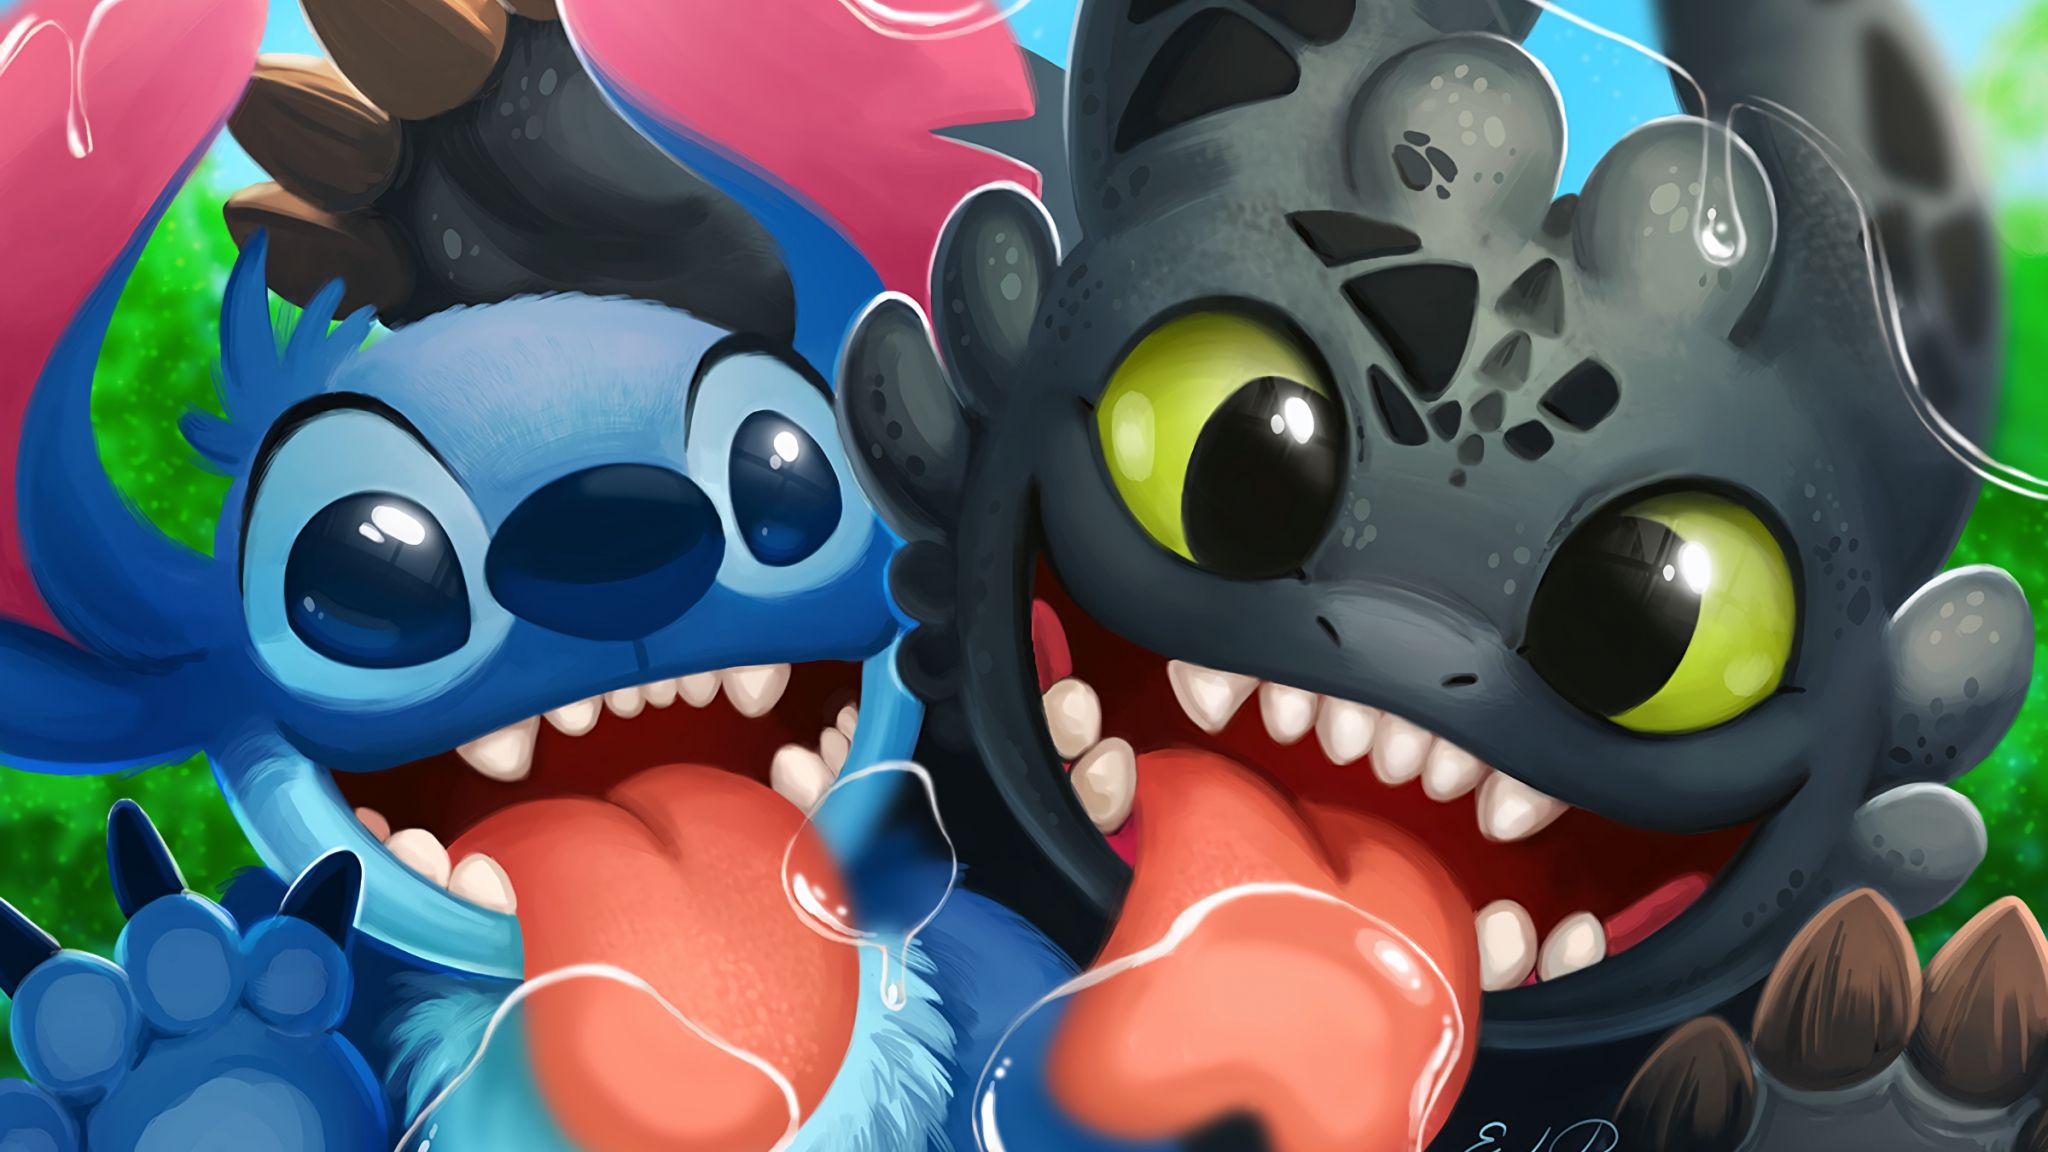 Desktop Wallpaper Stitch, Lilo And Stitch, Toothless, How To Train Your Dragon, Crossover, HD Image, Picture, Background, D0fad7